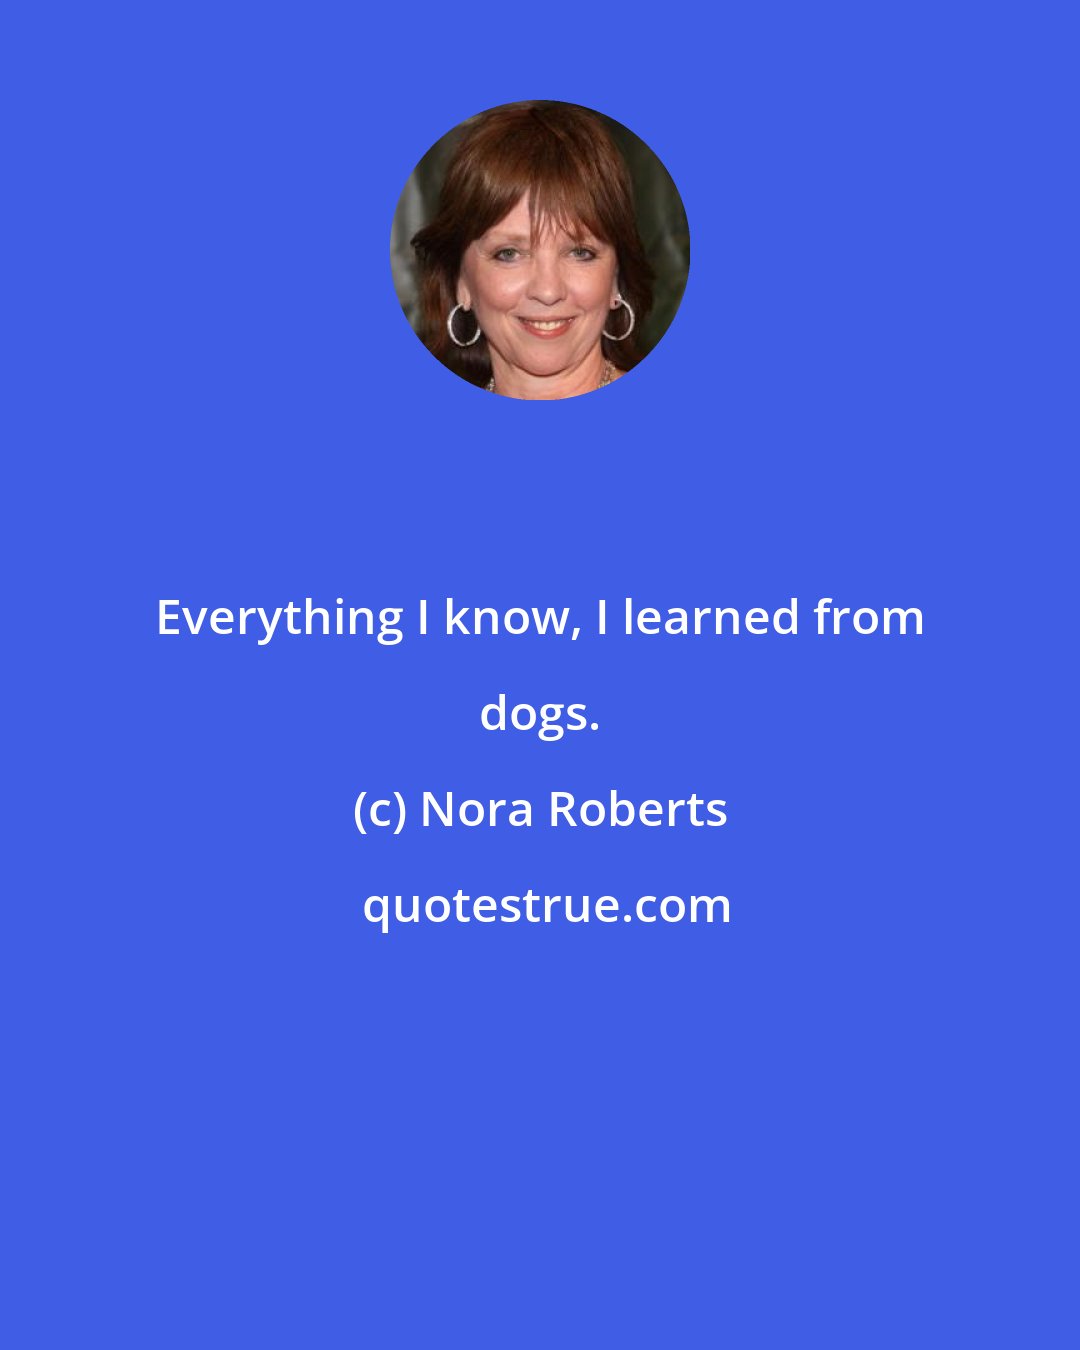 Nora Roberts: Everything I know, I learned from dogs.